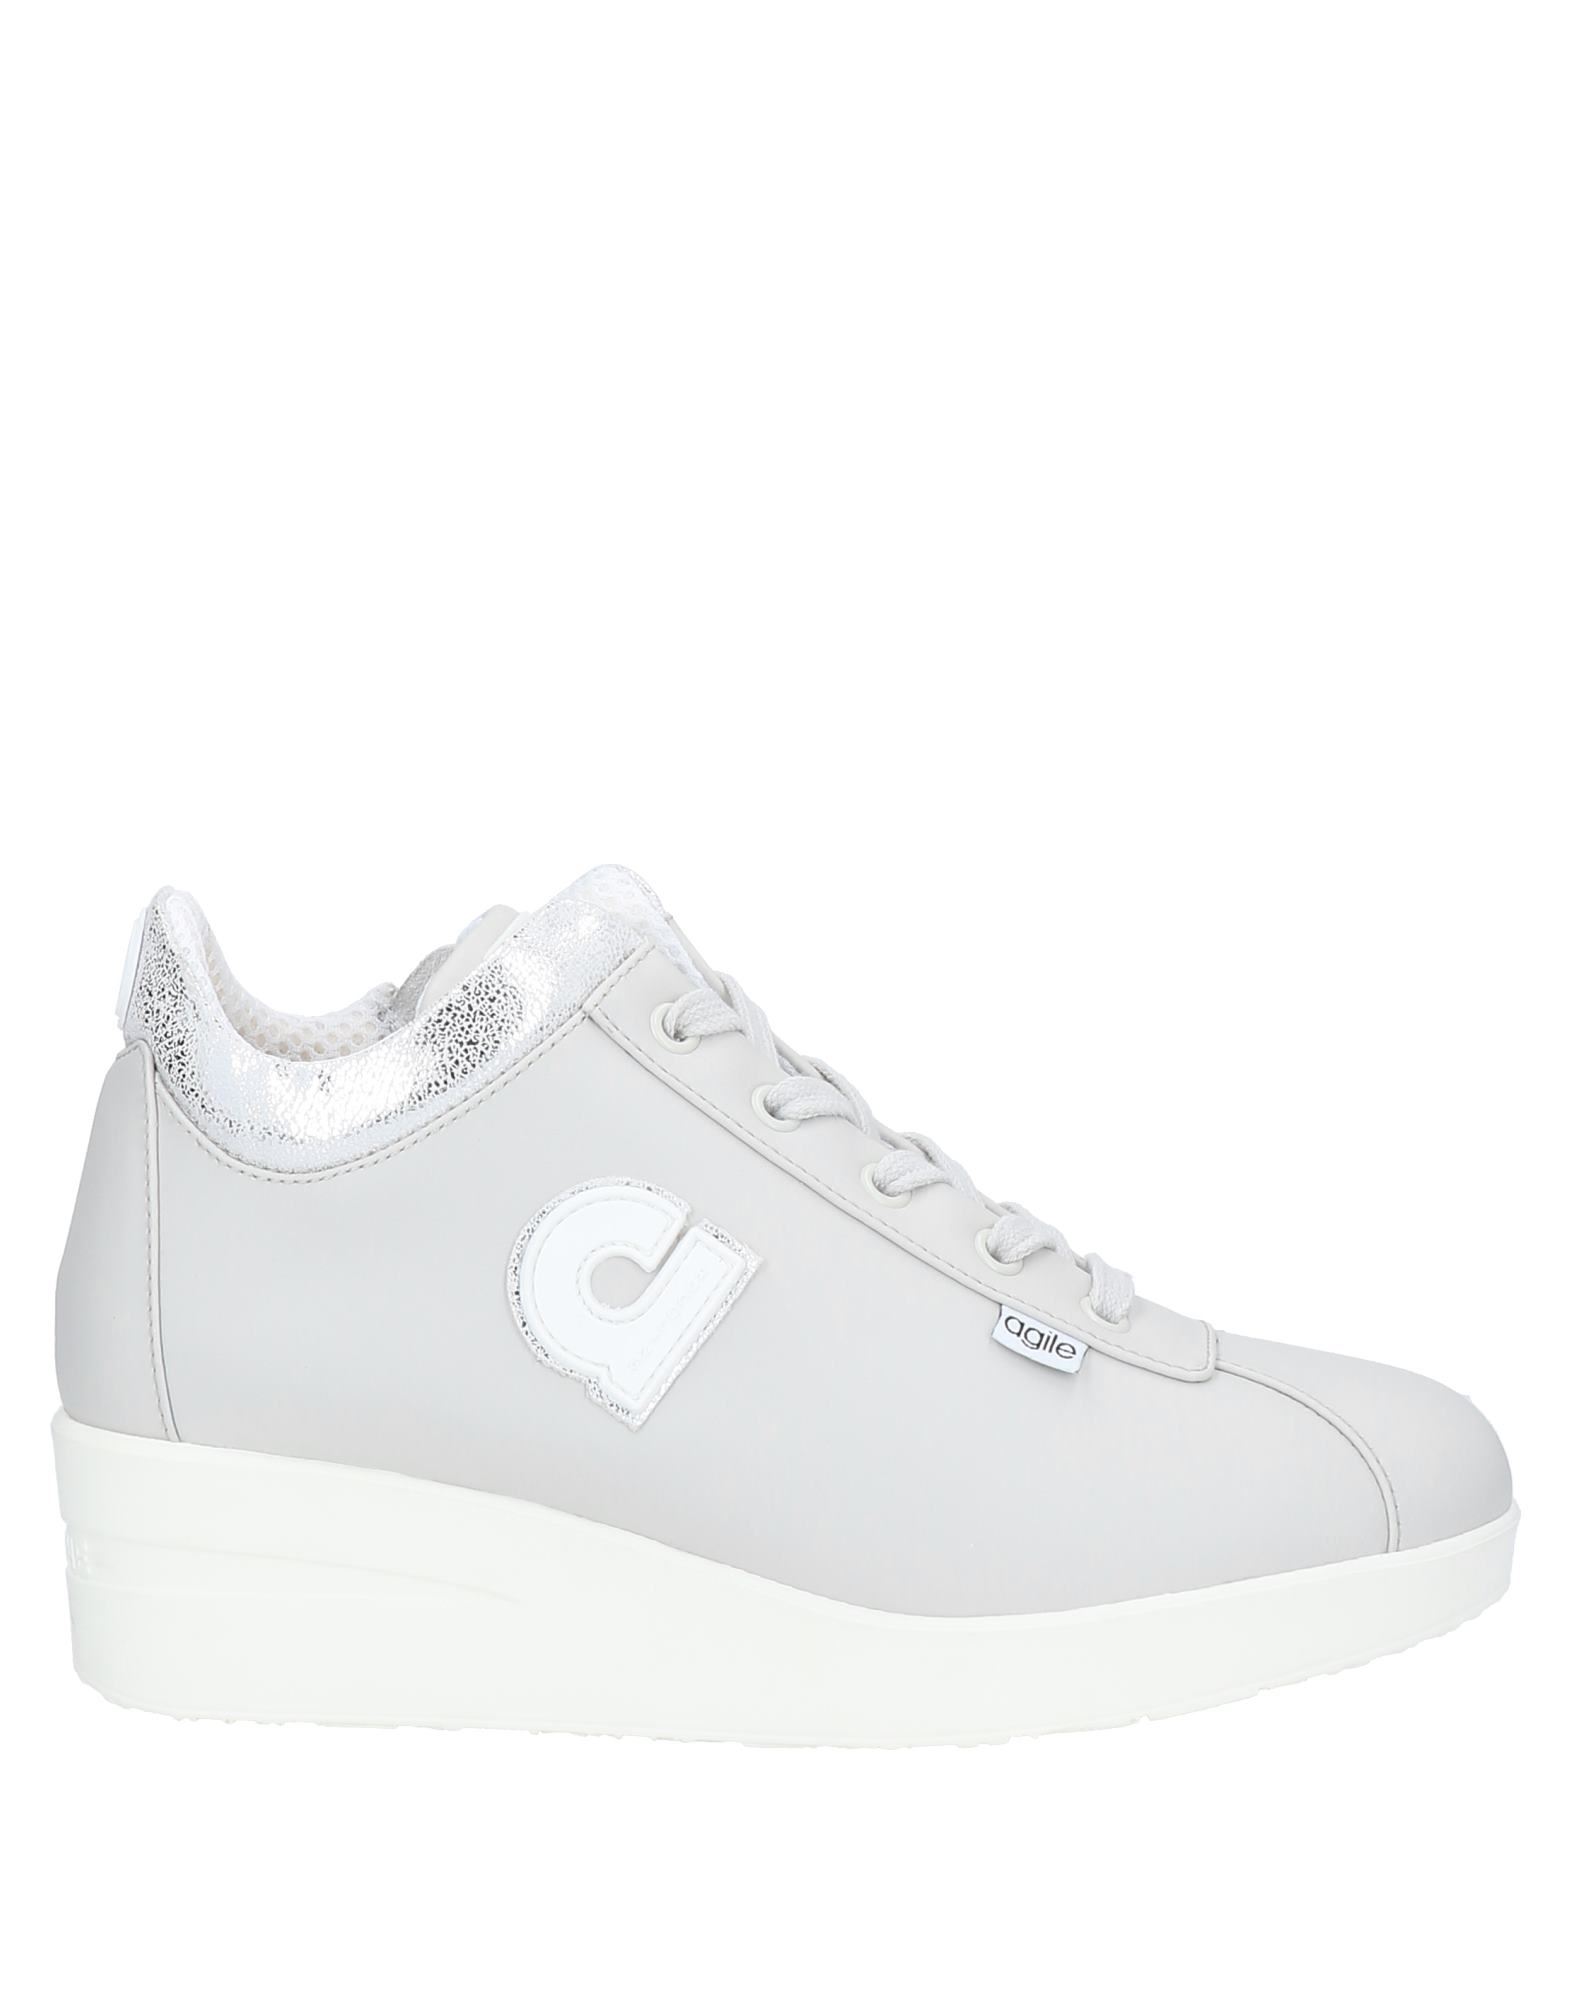 AGILE by RUCOLINE Sneakers